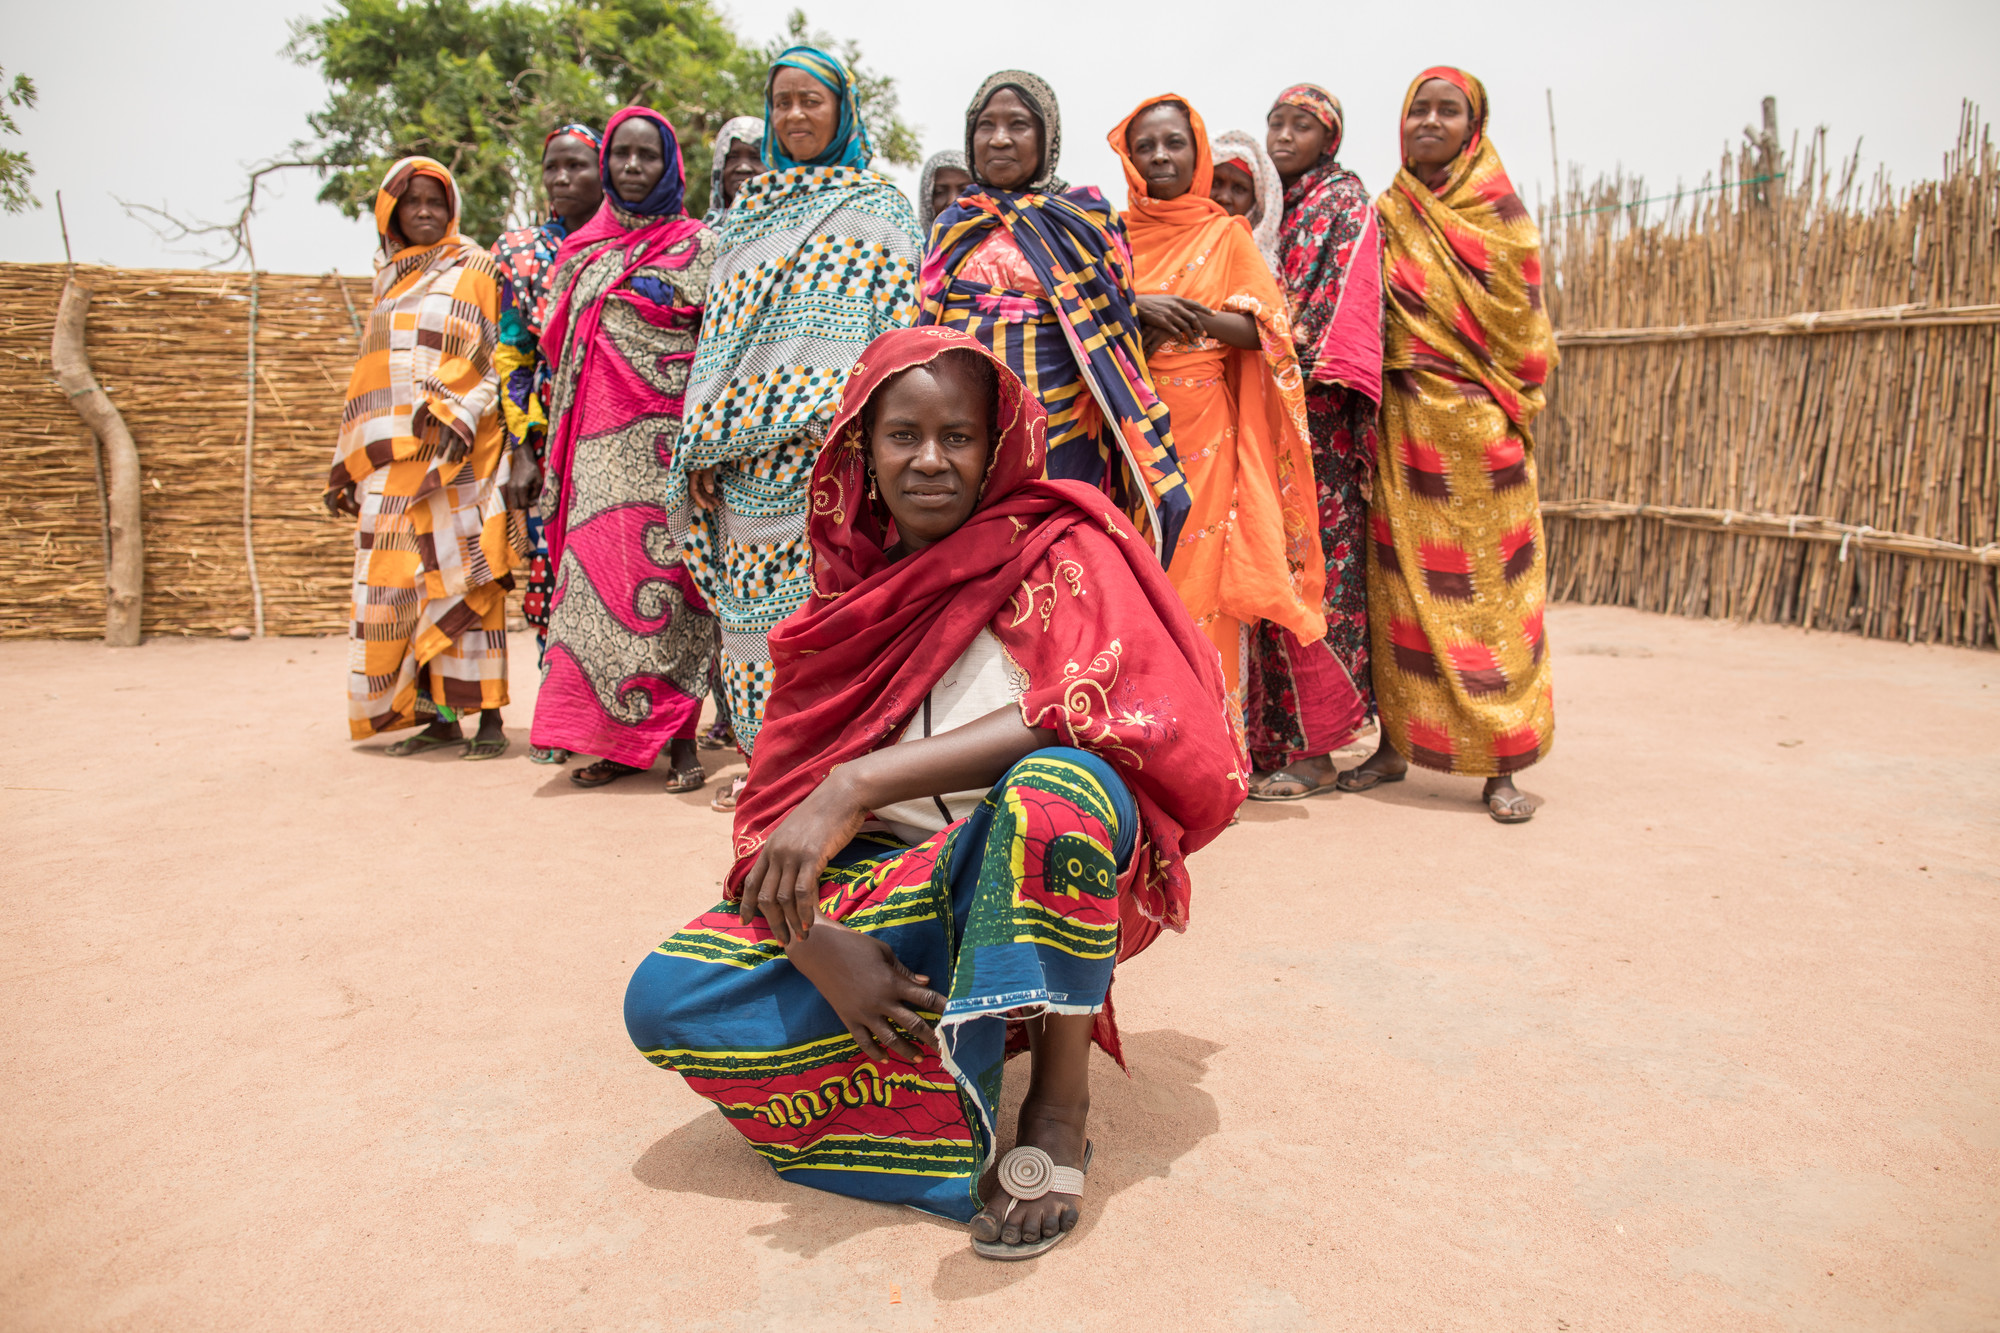 A Chadian woman squats in front of a group of women posing for the camera.